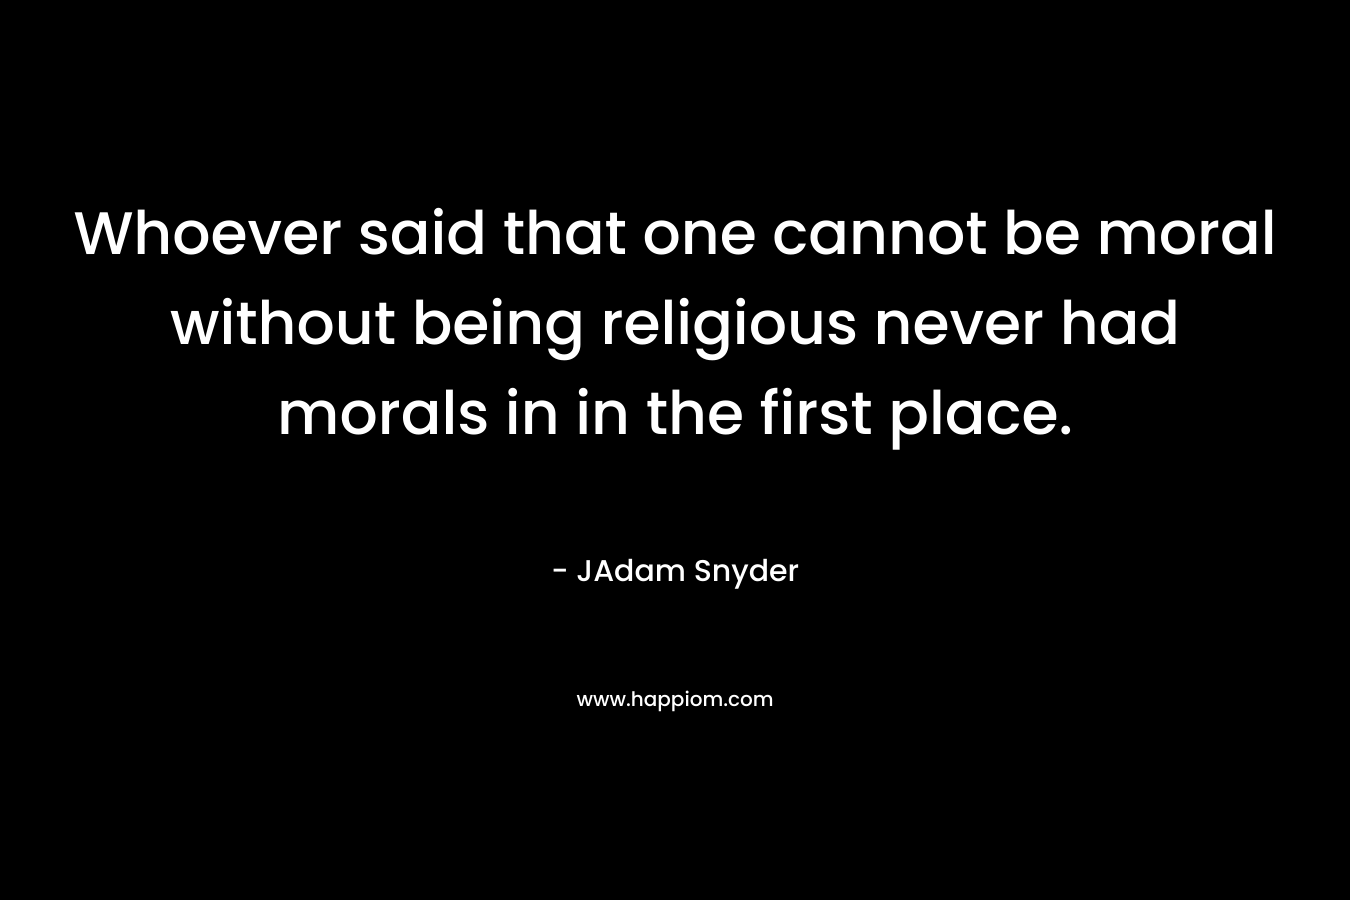 Whoever said that one cannot be moral without being religious never had morals in in the first place.